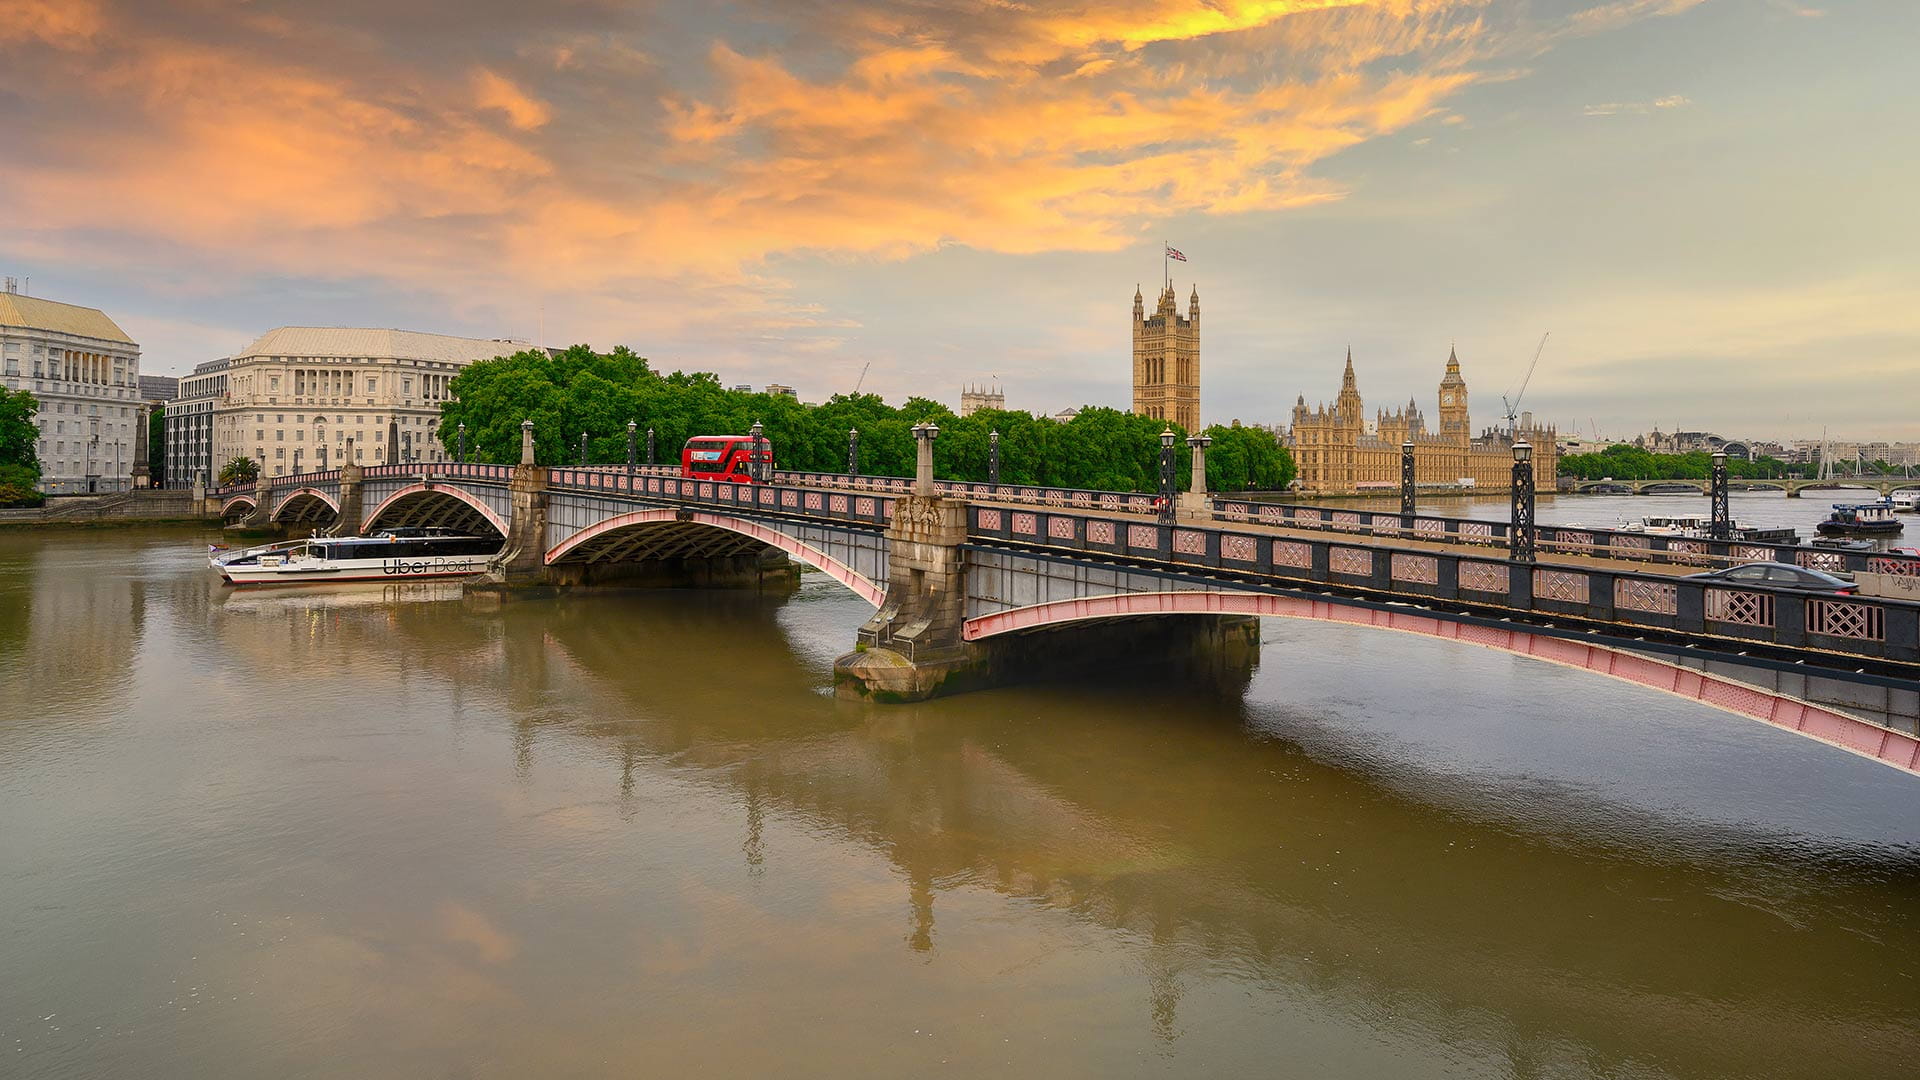 Image of Westminster bridge at evening time